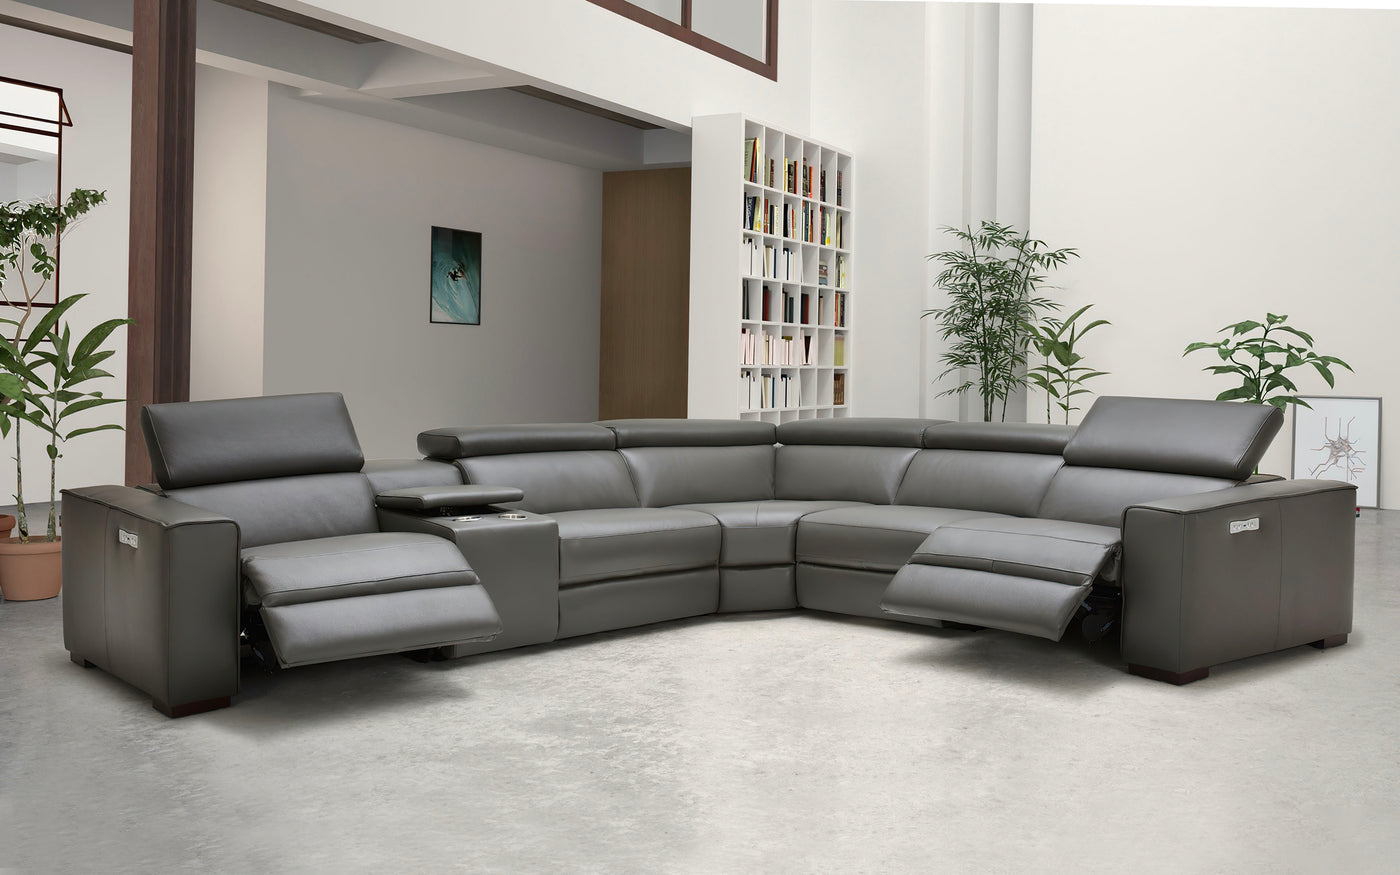 t27c modern leather sectional sofa with recliners